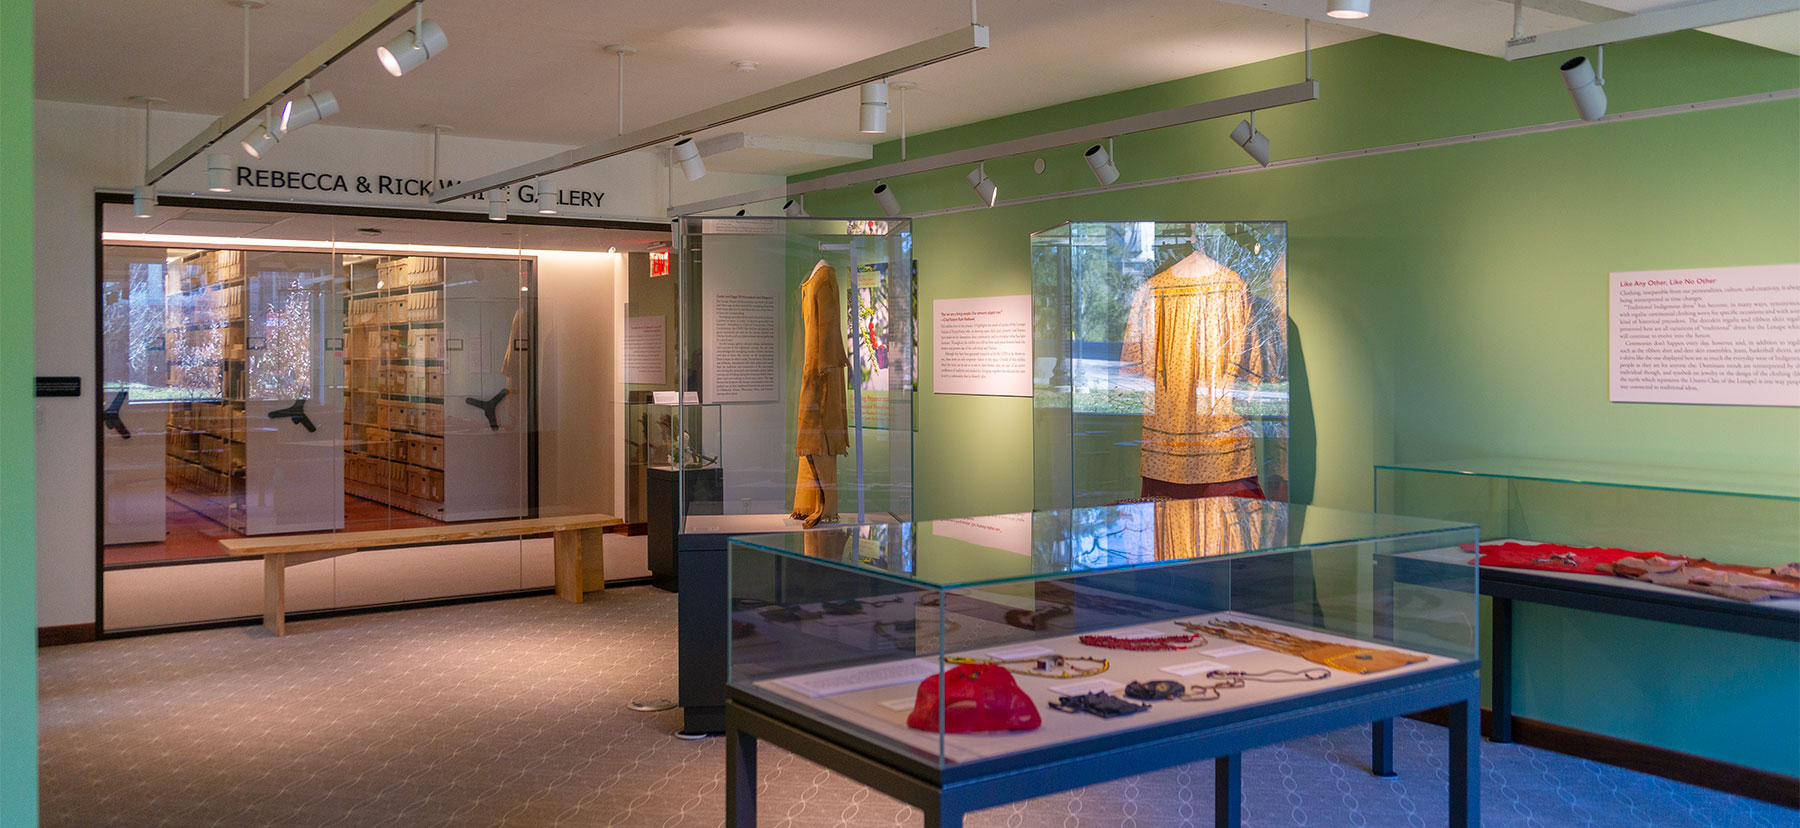 Exhibit space with glass cases displaying clothing. The back wall is green and lit form overhead